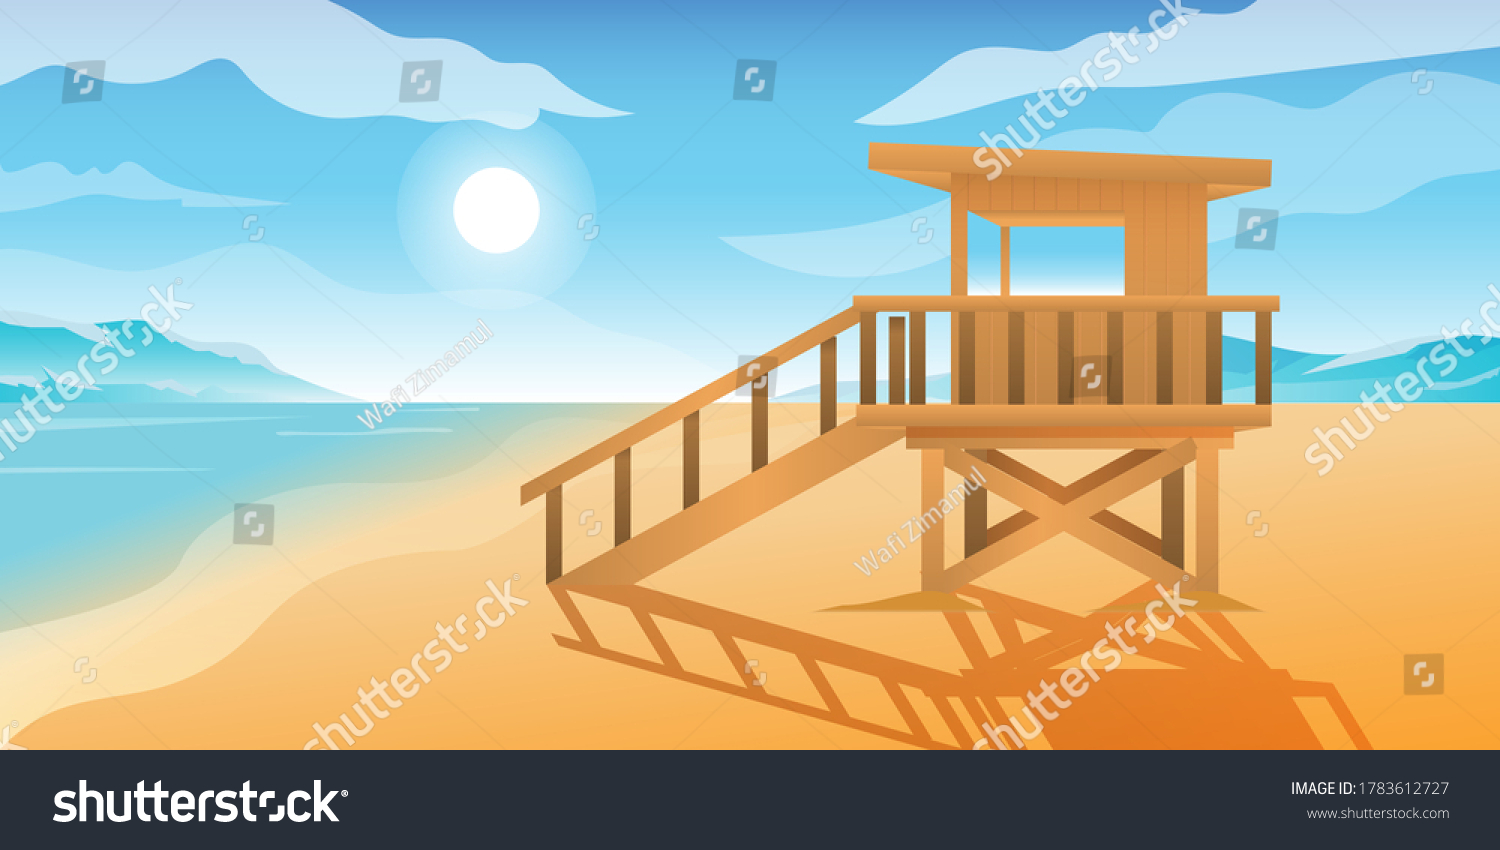 SVG of House Life Guard In Beach With Mountain Background Cartoon Illustration svg